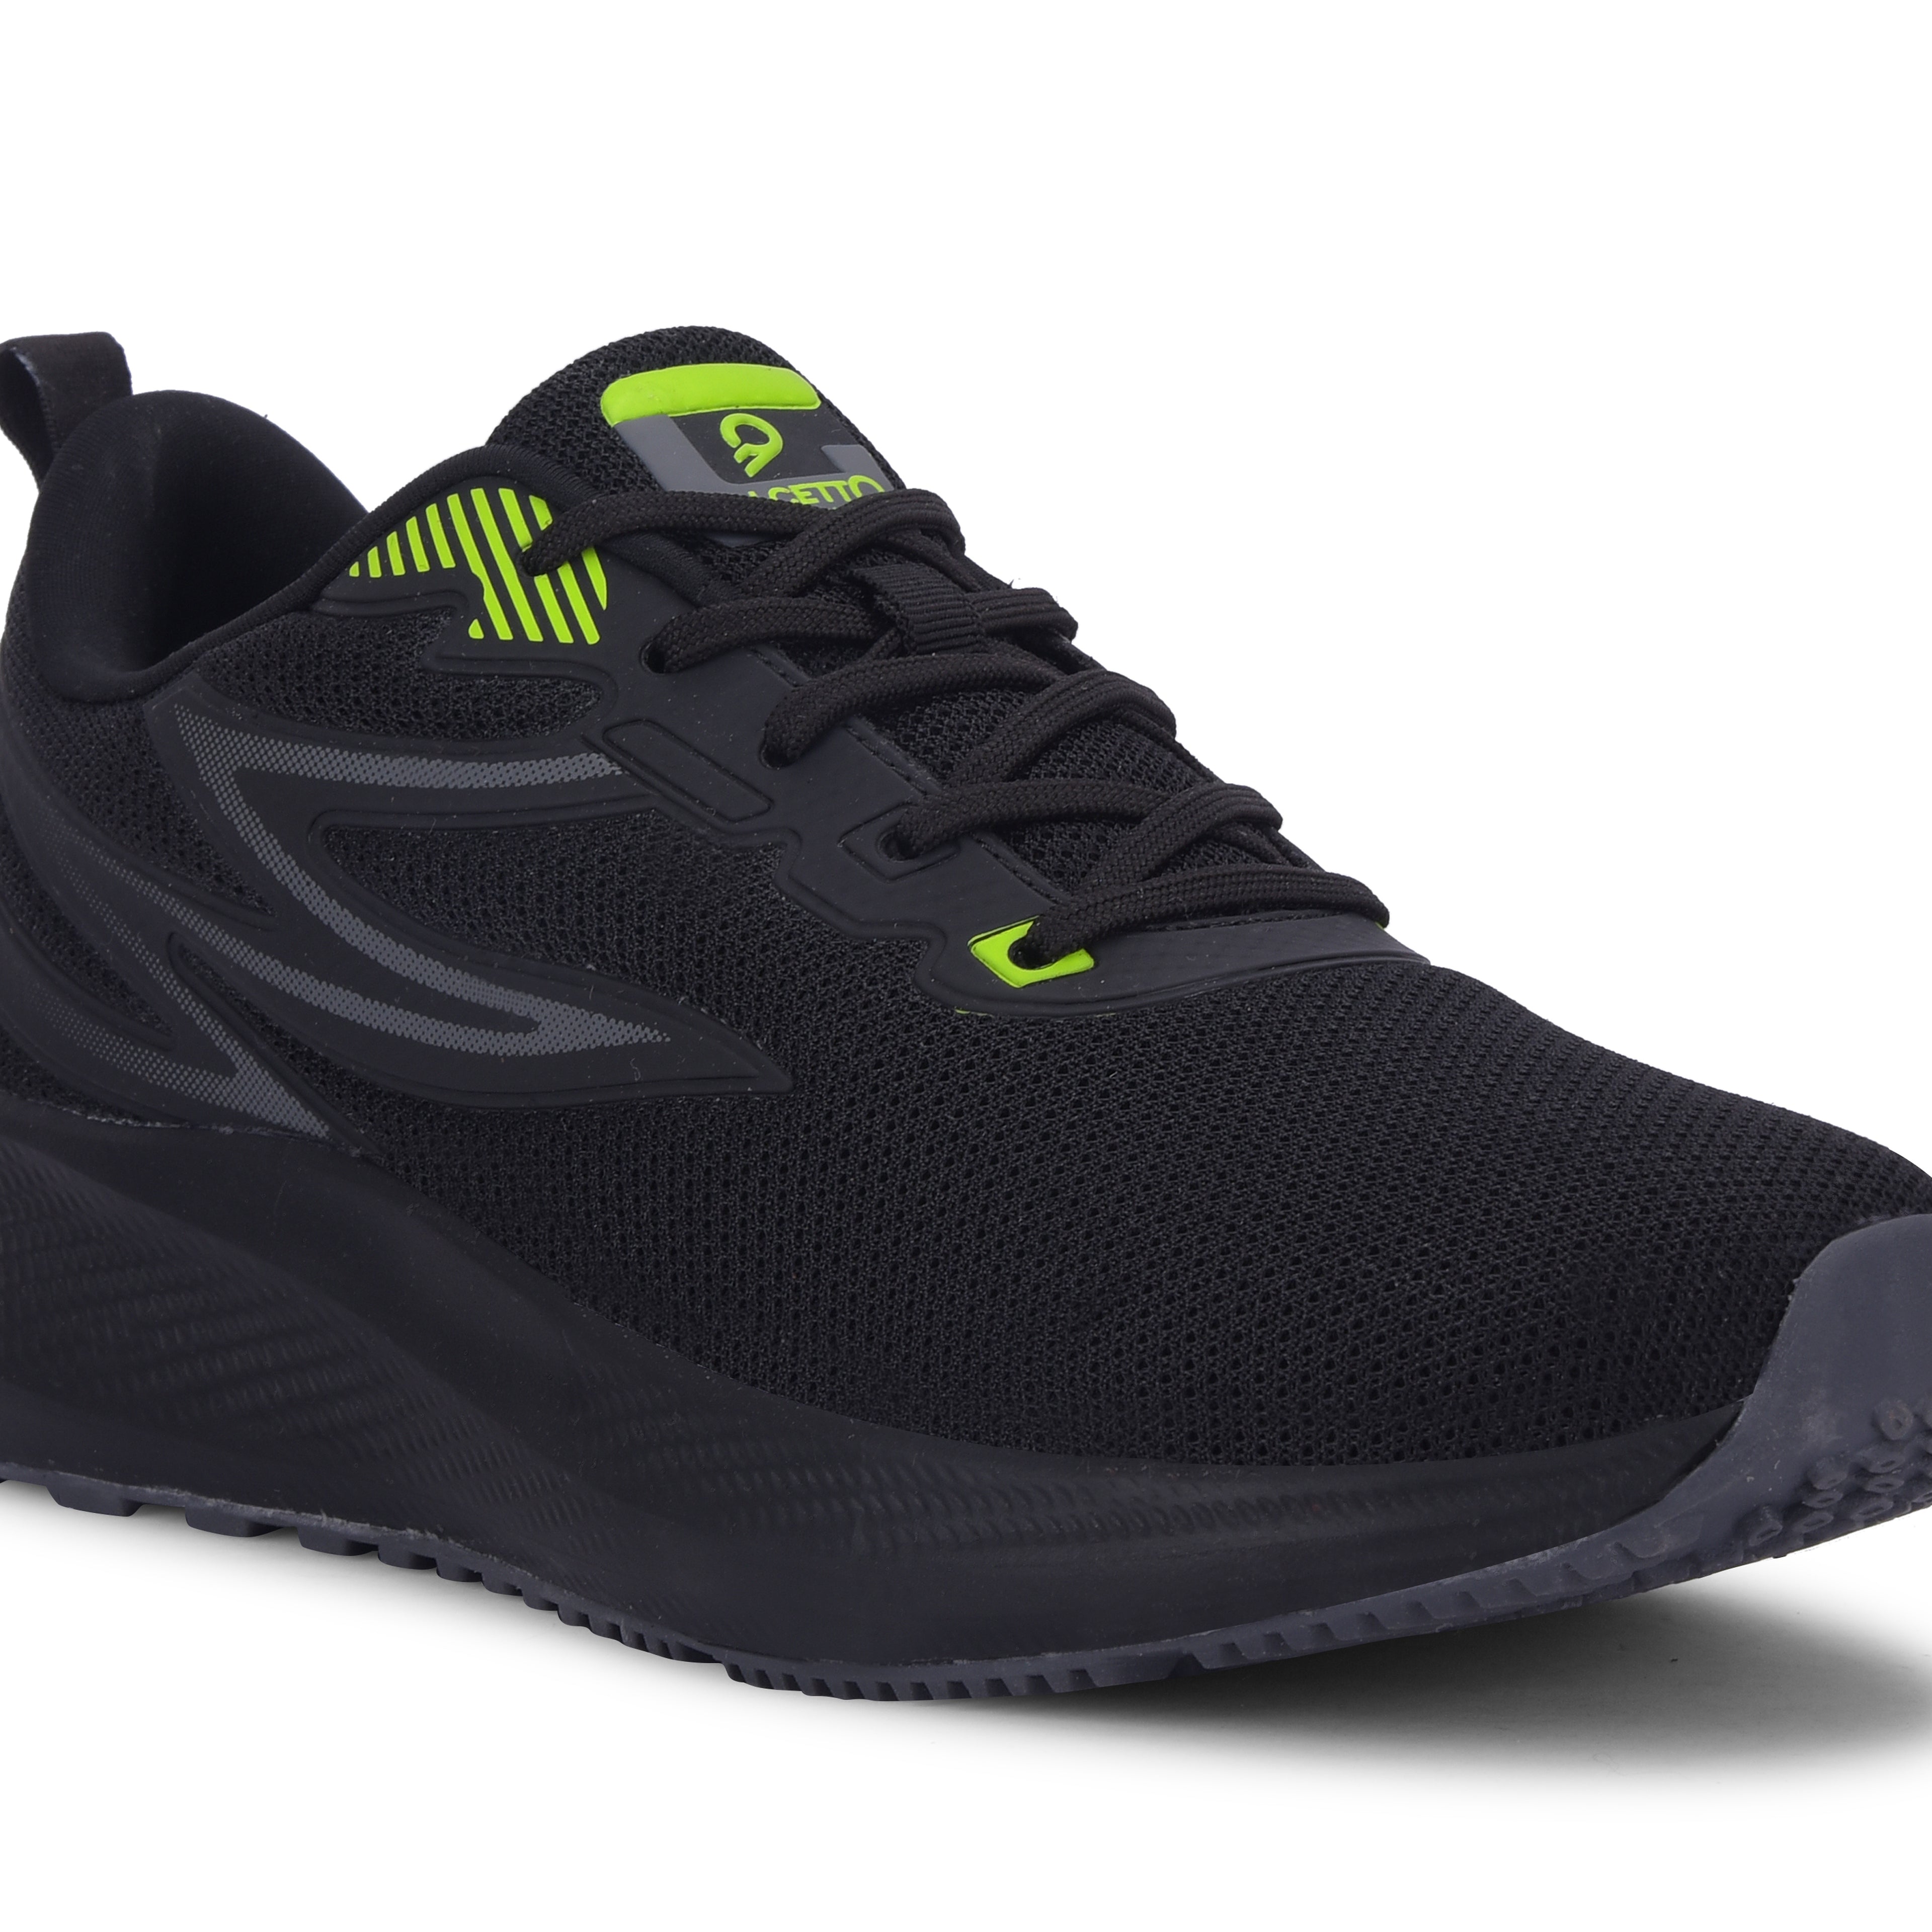 Calcetto CLT-2011 Black Running Sports Shoes For Men